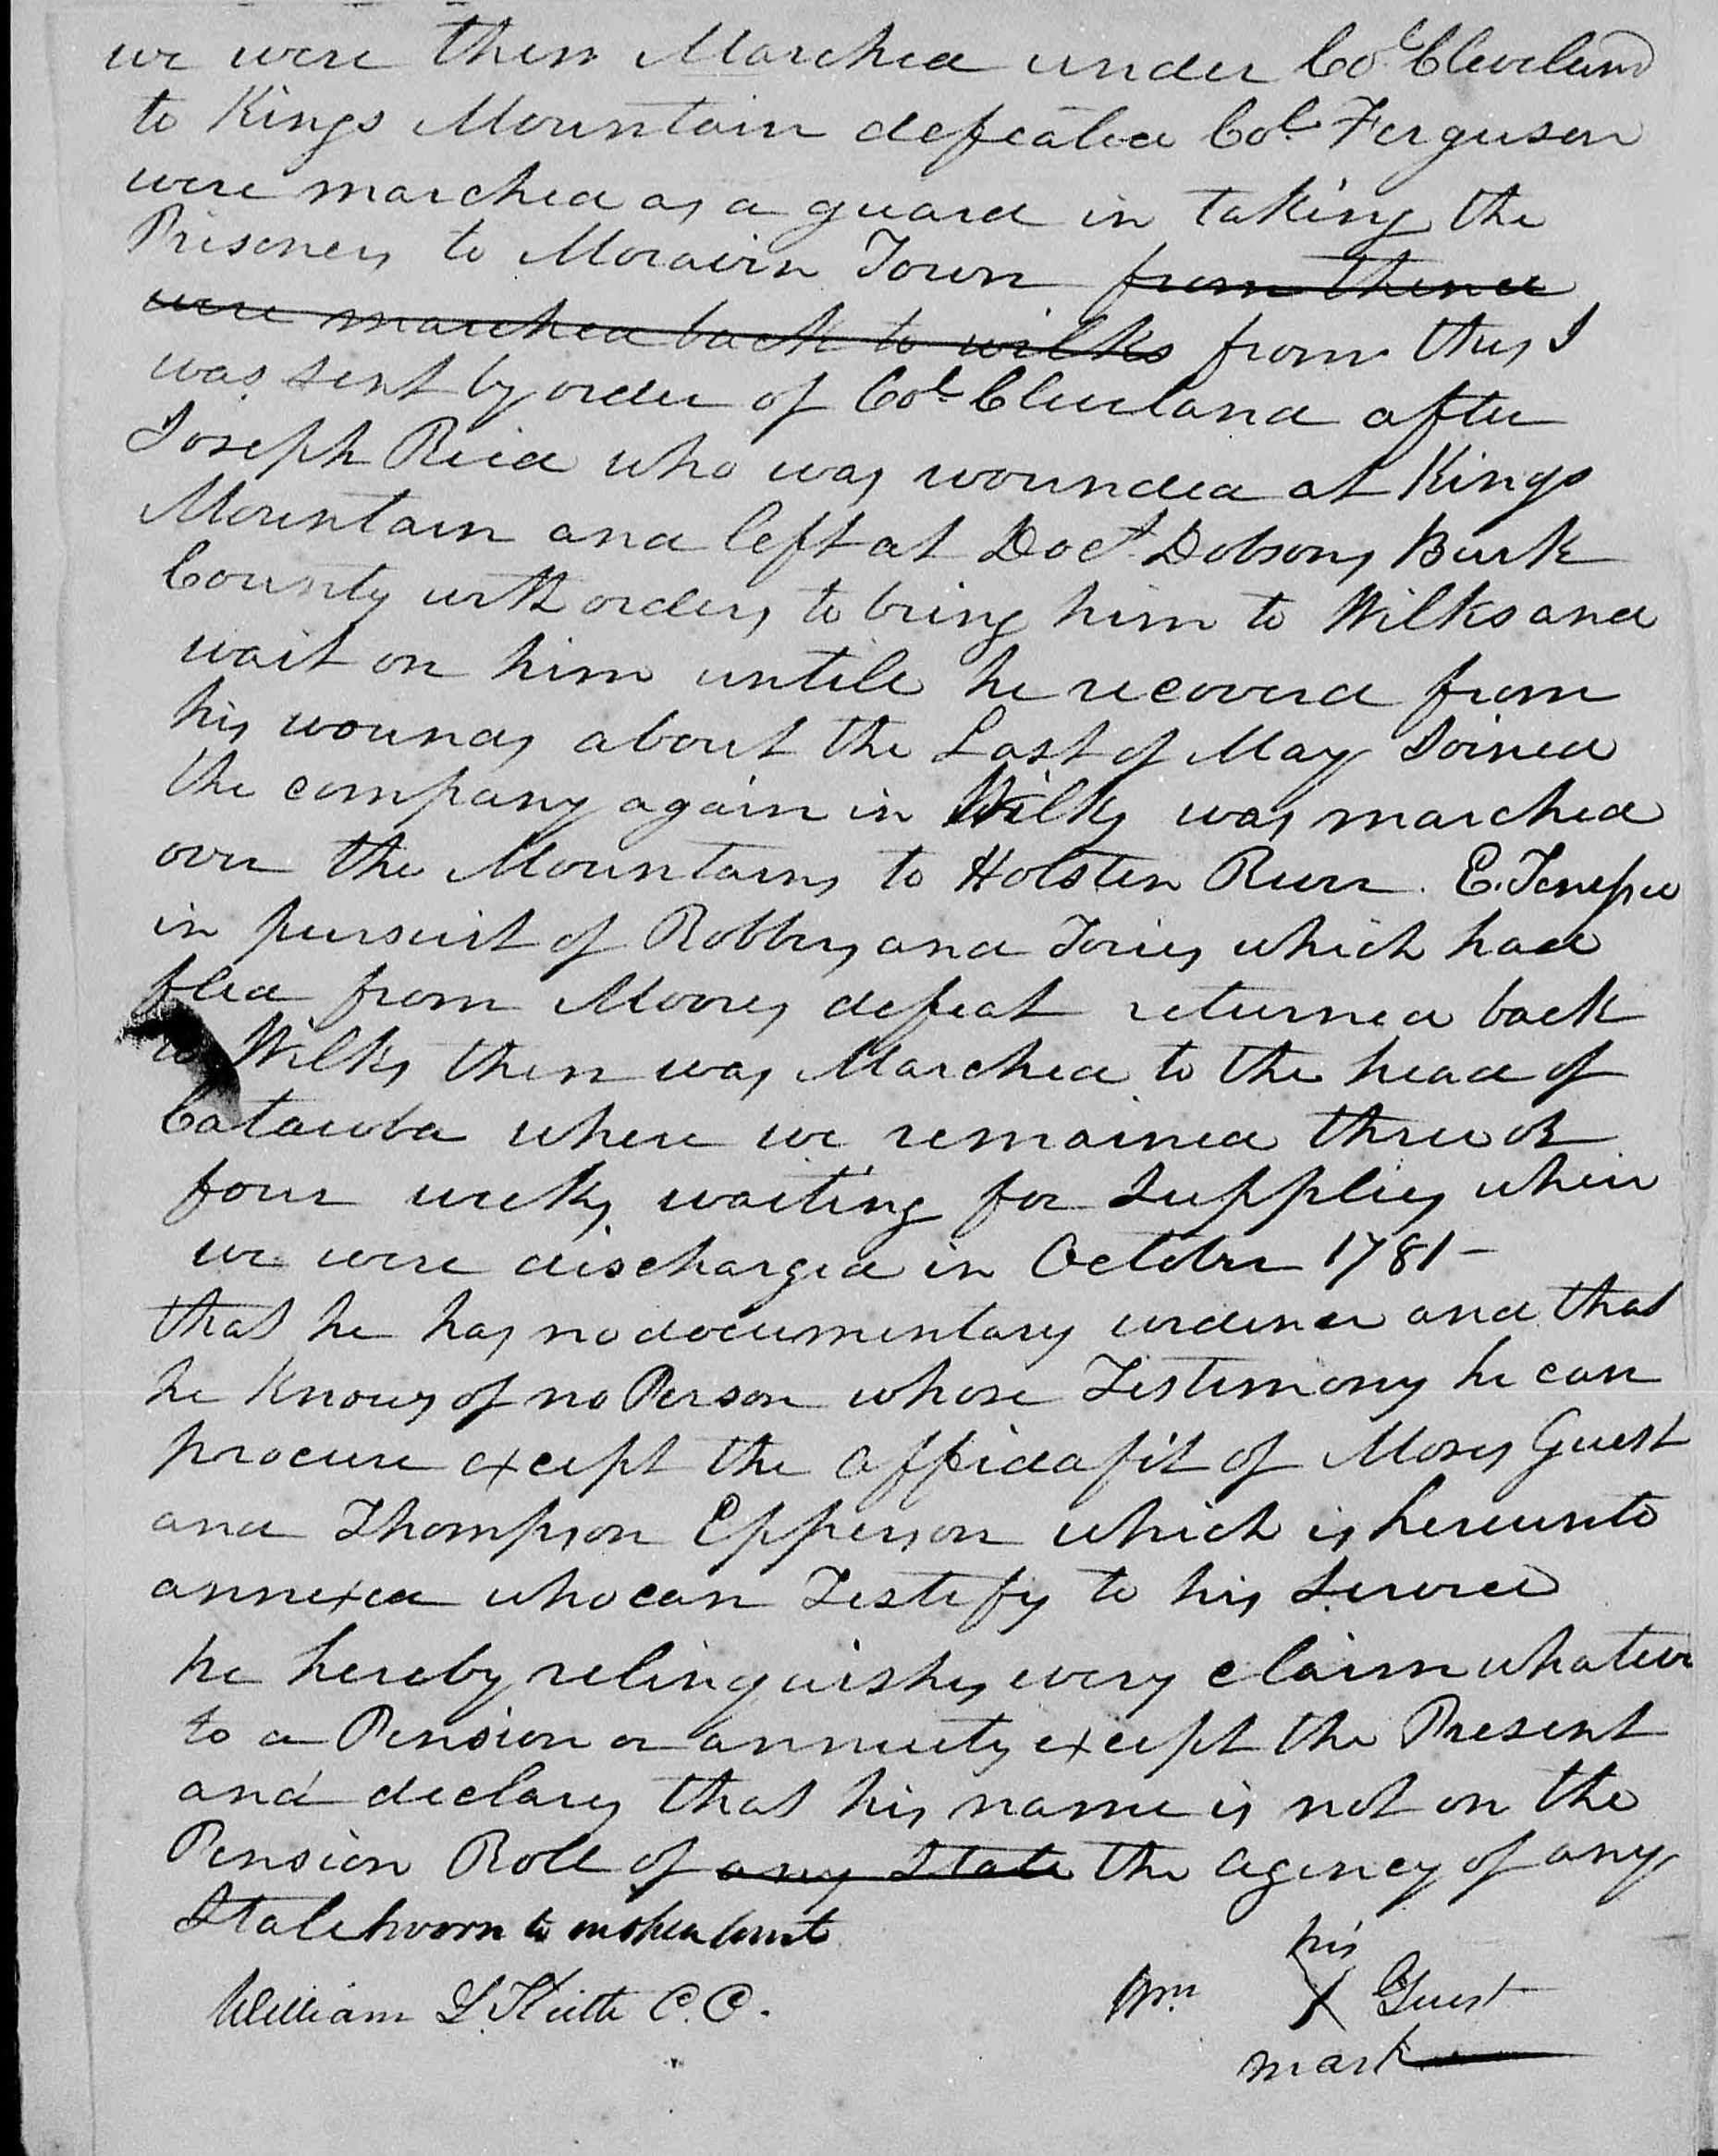 Application for a Veteran's Pension from William Guest, 11 March 1833, page 2